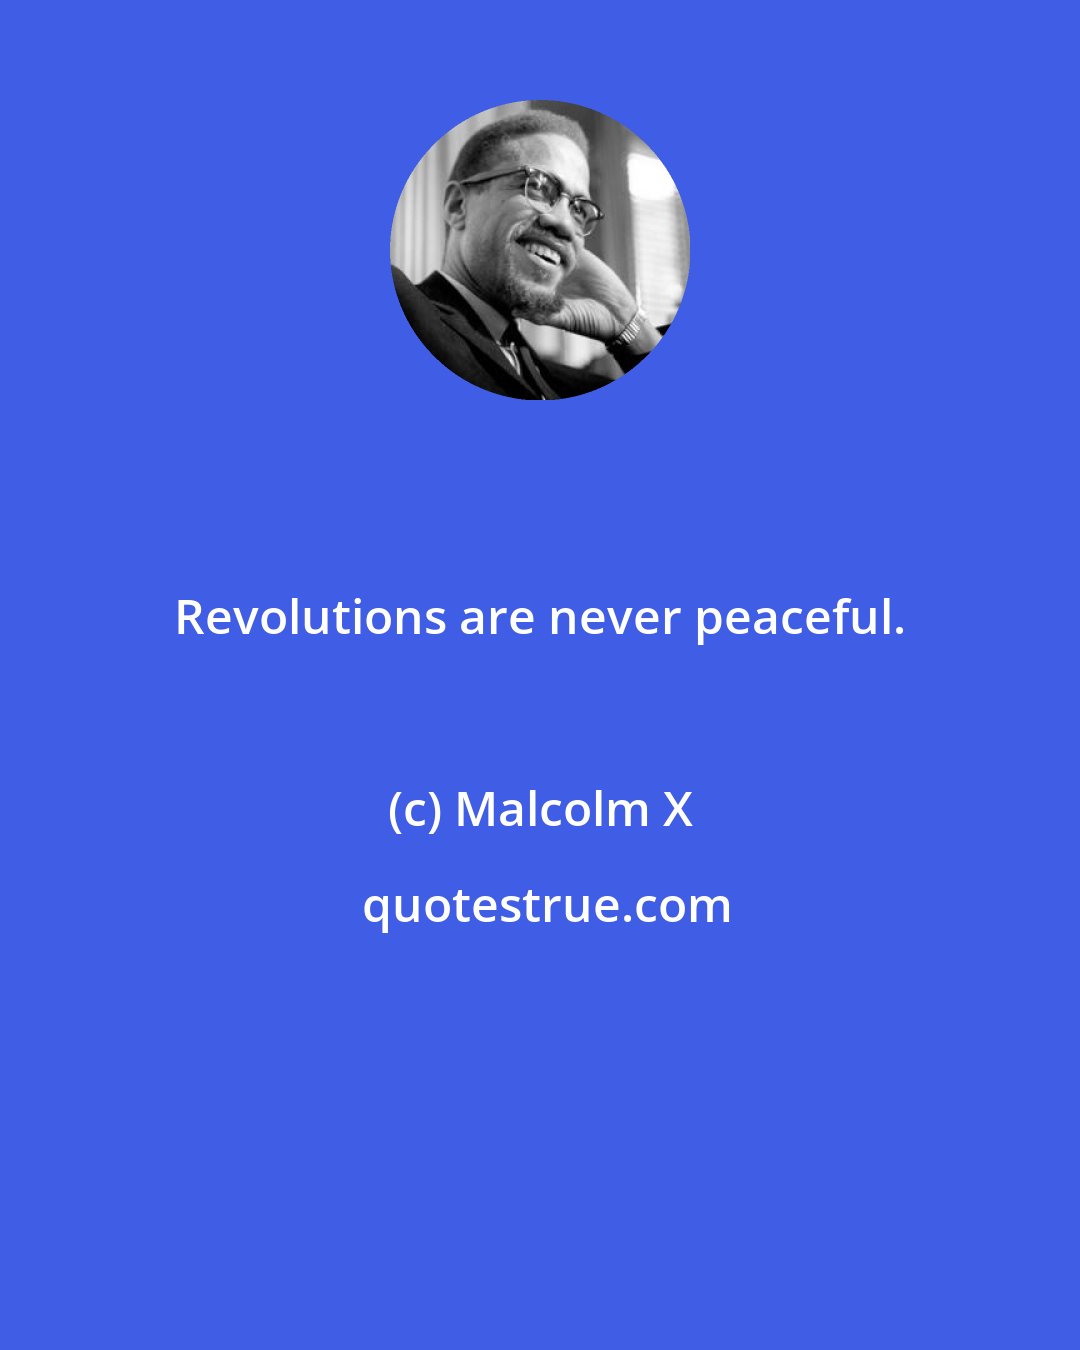 Malcolm X: Revolutions are never peaceful.